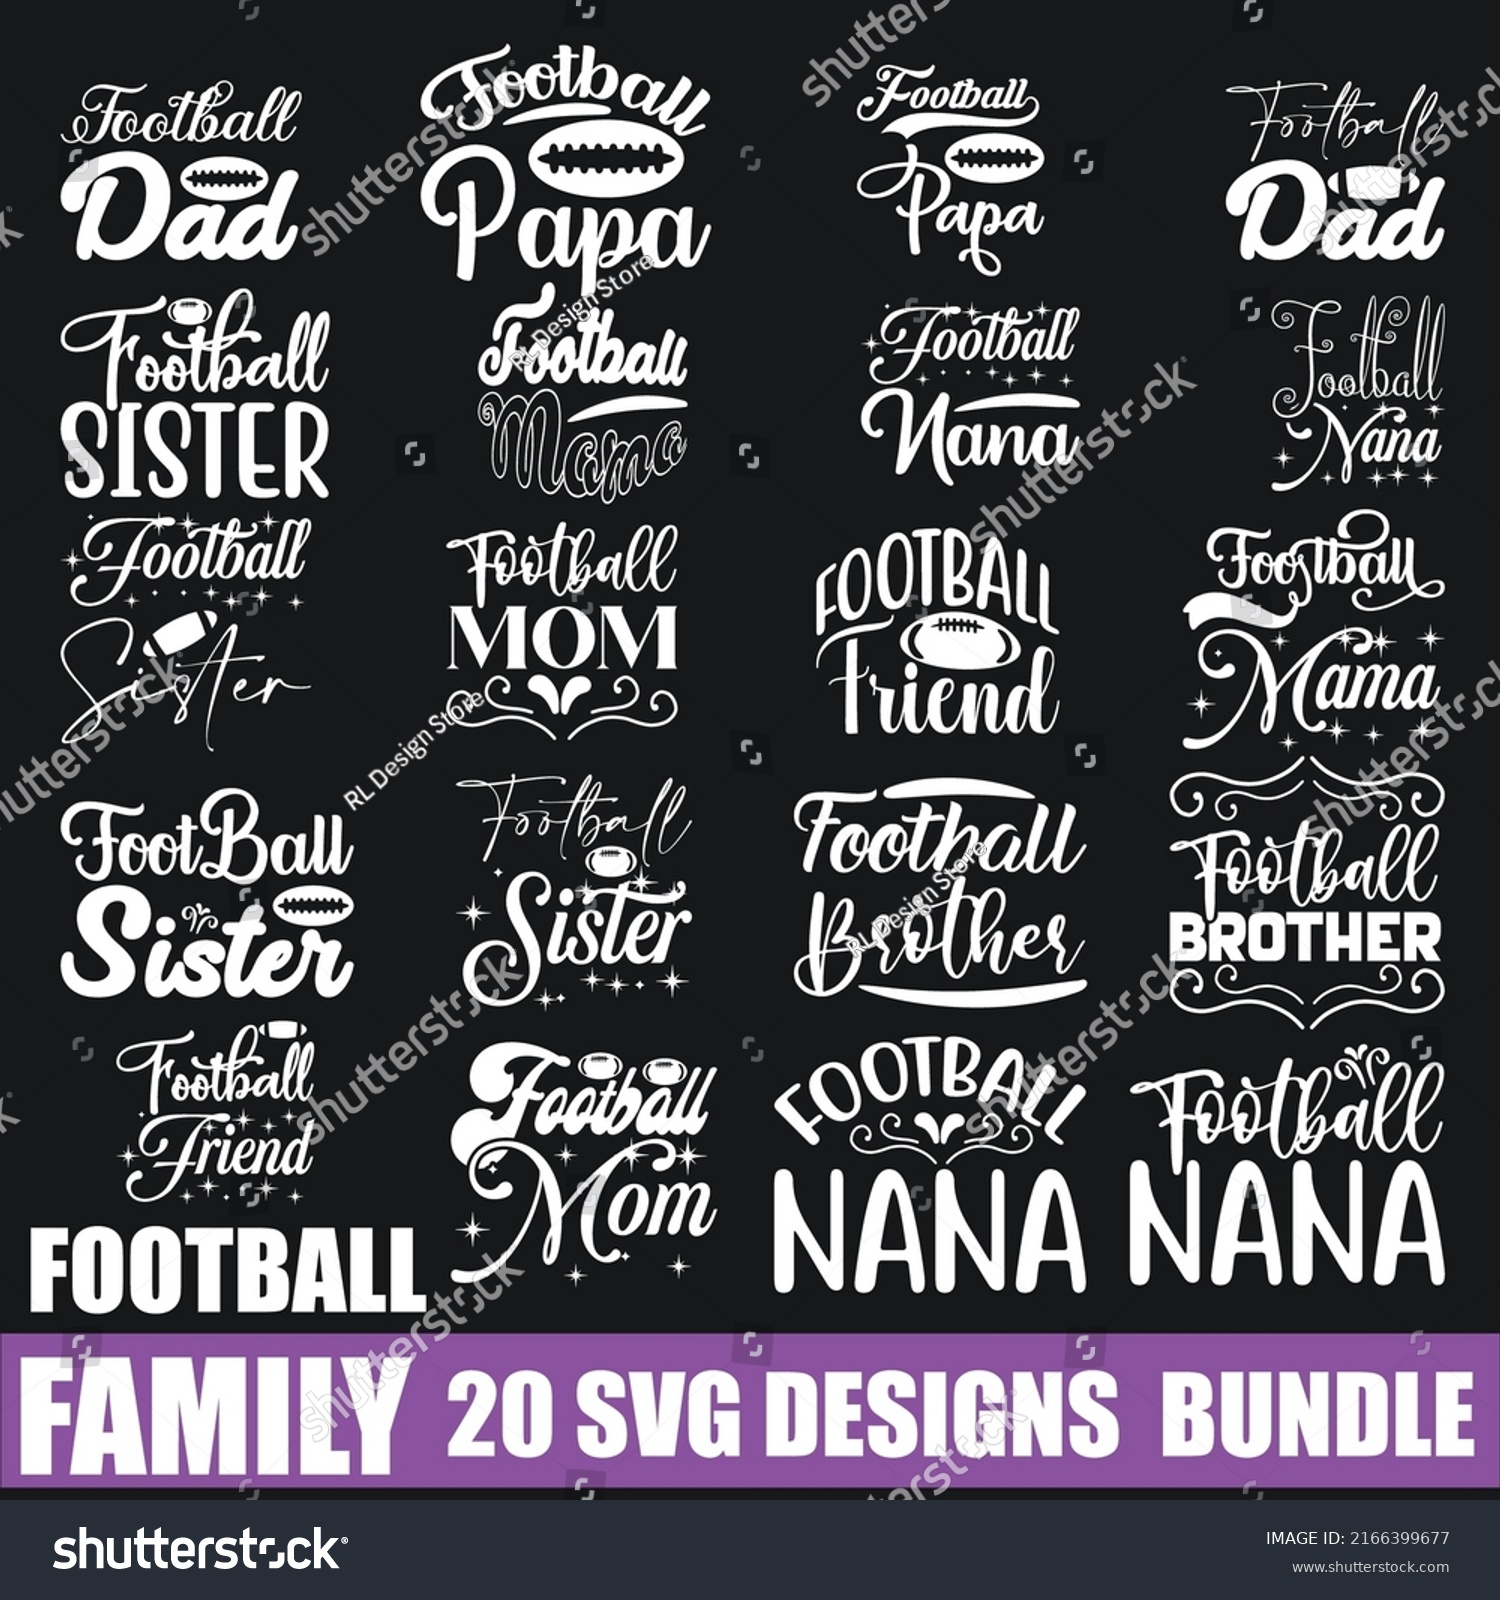 SVG of Football family Quotes SVG Designs Bundle. Football family quotes SVG cut files bundle, Football family quotes t shirt designs bundle, Quotes about Funny cut files,  eps files, SVG bundle svg